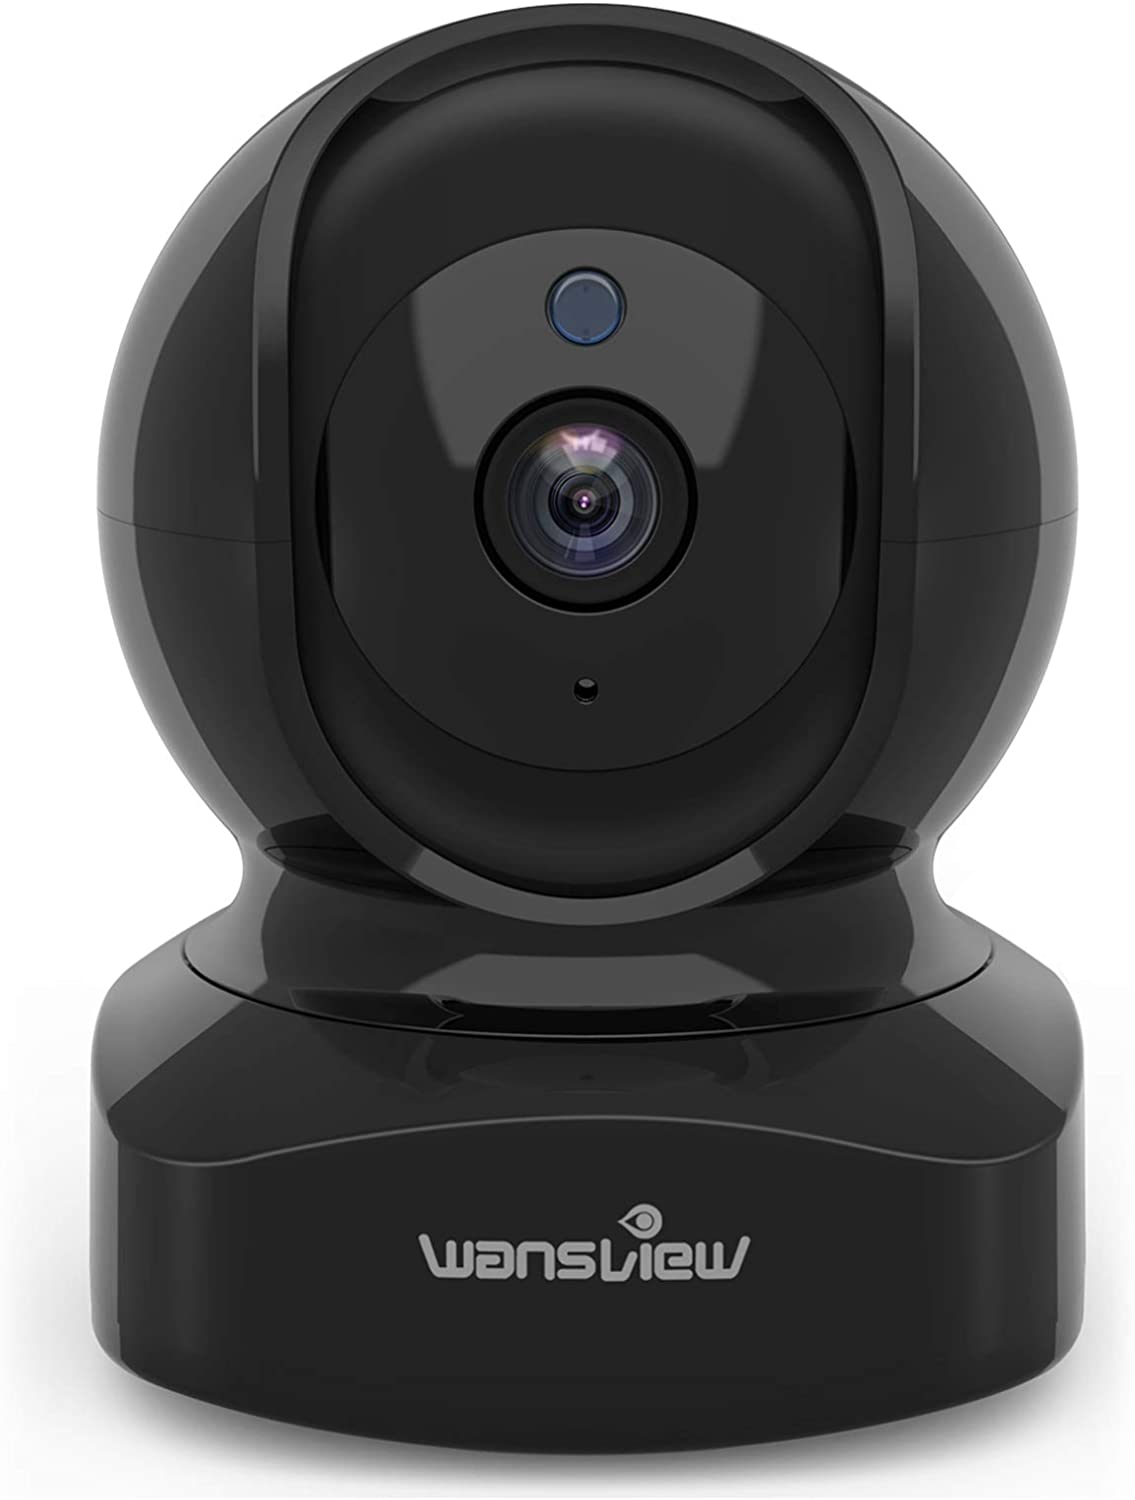 10. Wansview Wireless Security Camera